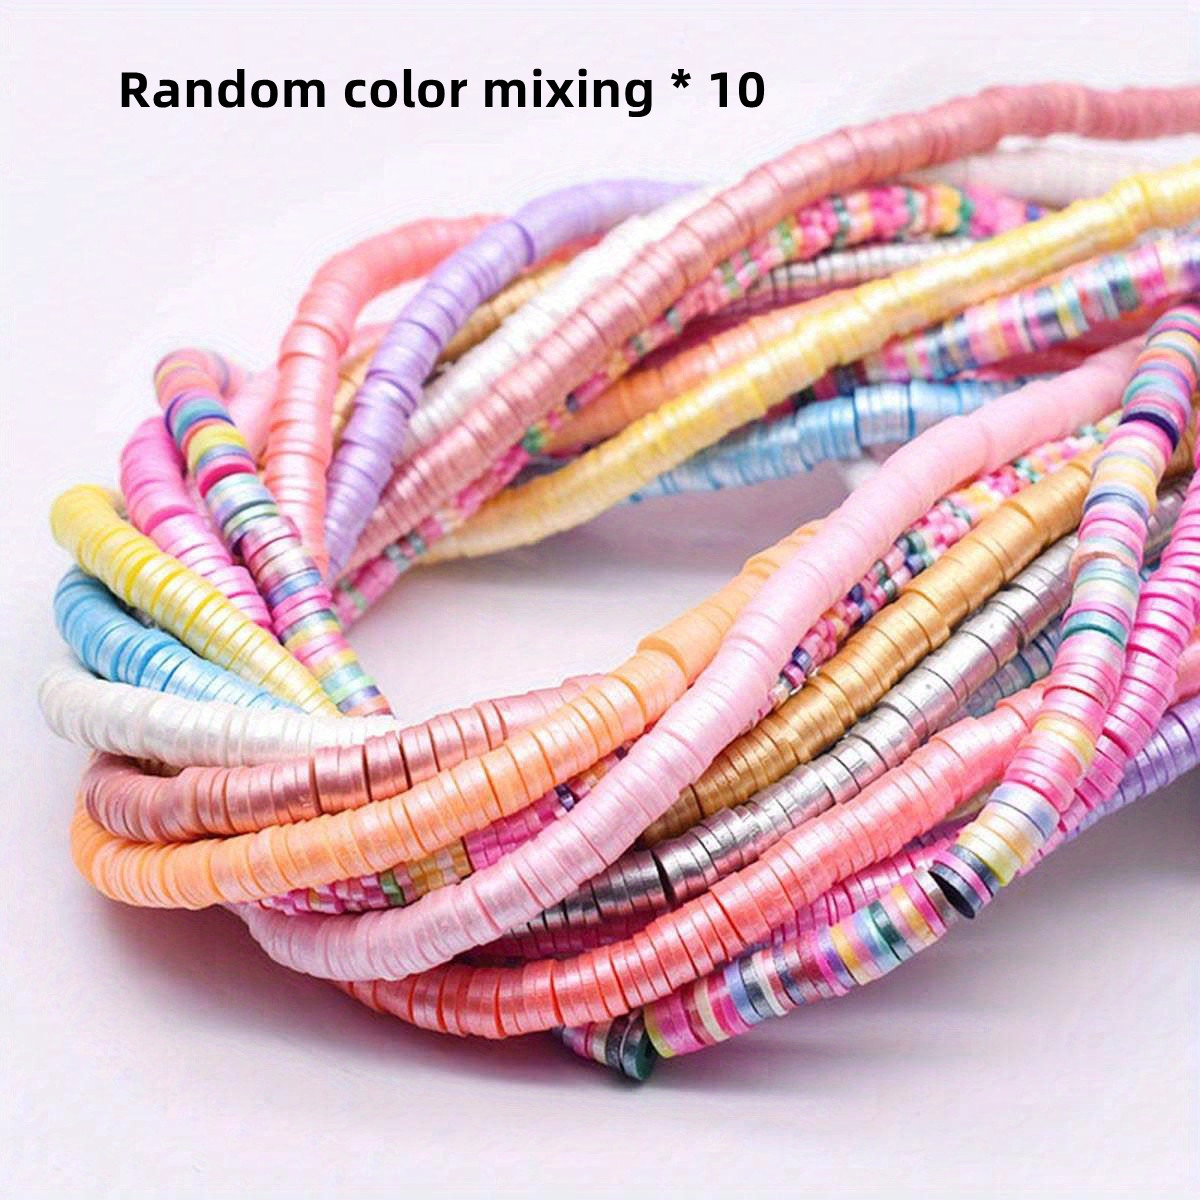 10pcs 0.24inch Rainbow Soft Clay Strips Flat Round Polymer Clay Beads  Debris Plate Loose Spacing Handmade Bohemian Sliced Beads For DIY Jewelry  Making